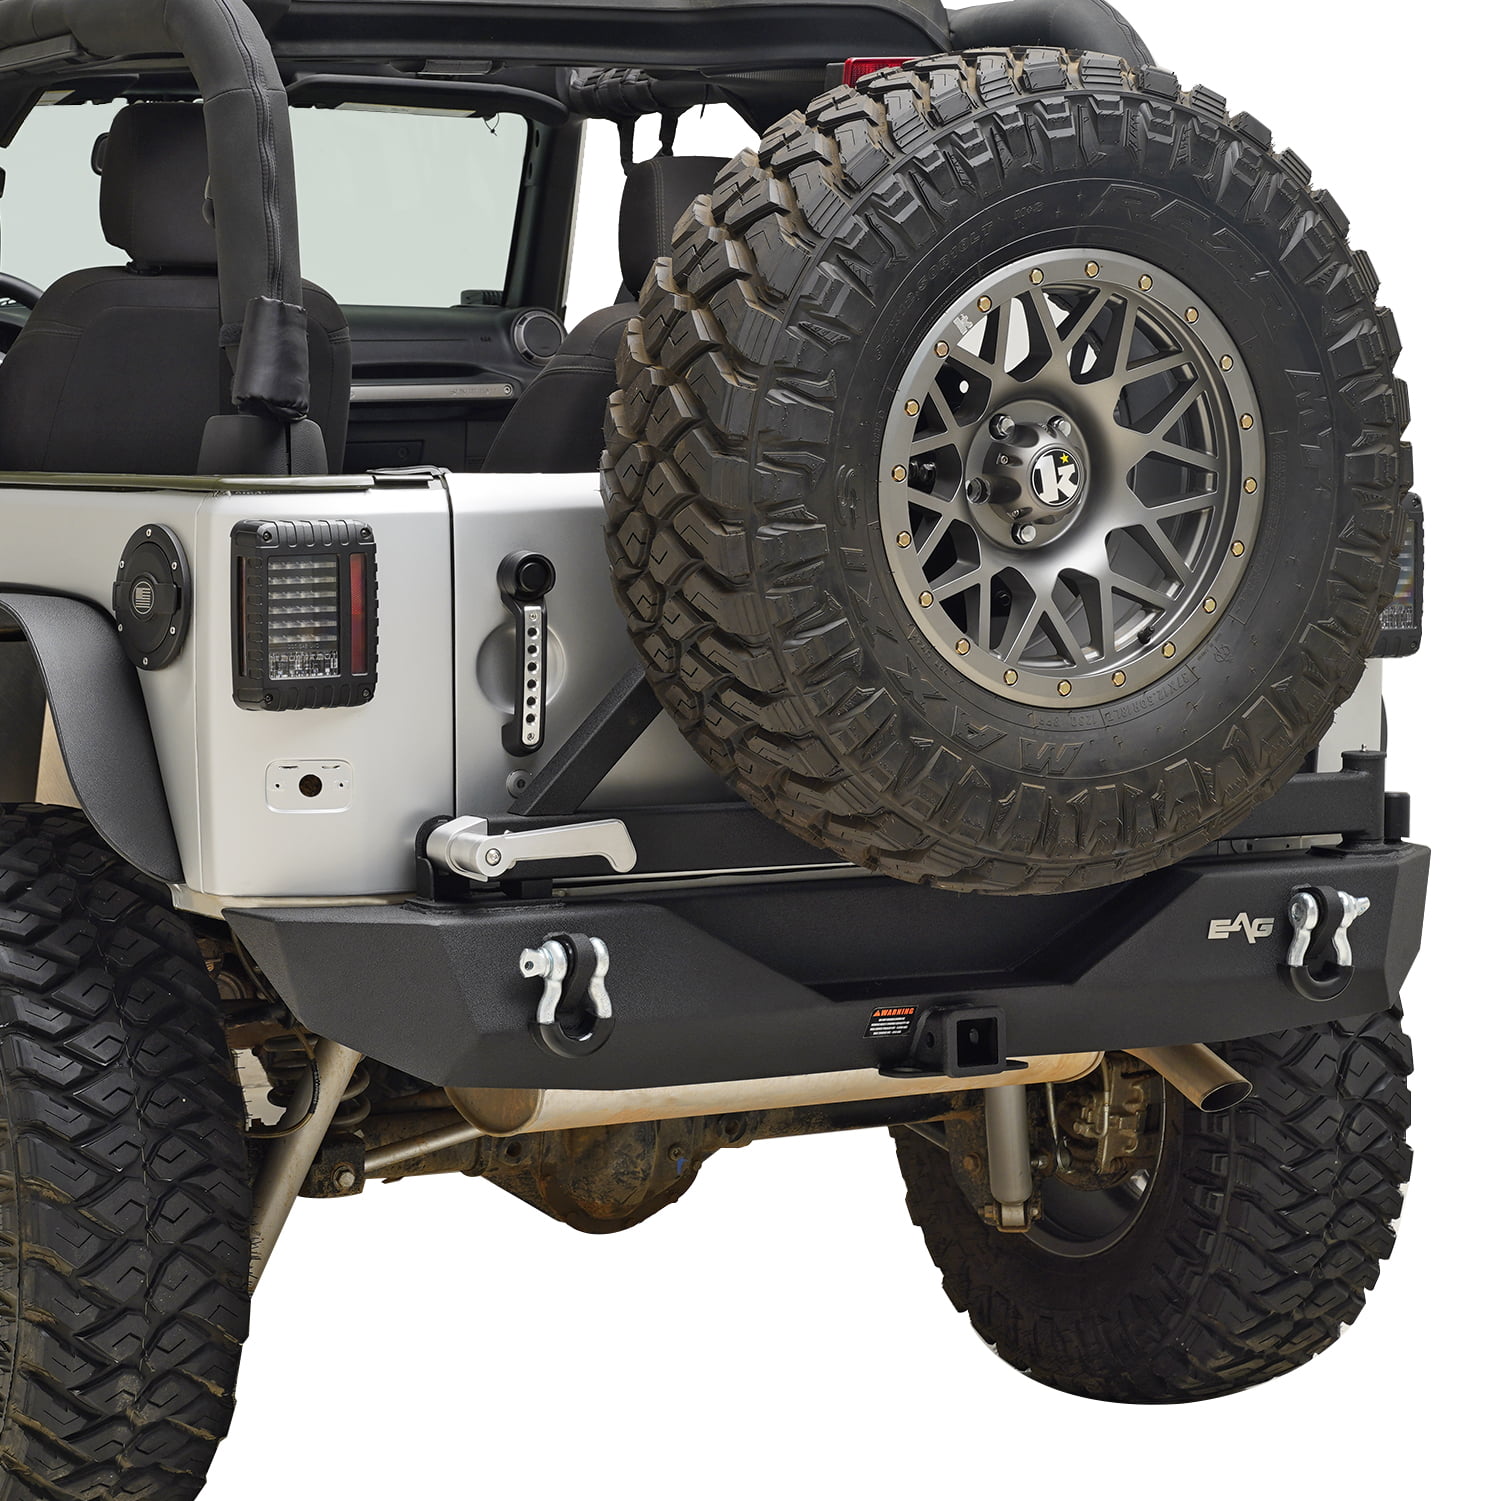 EAG Rear Bumper with Tire Carrier Fit for 07-18 Wrangler JK 